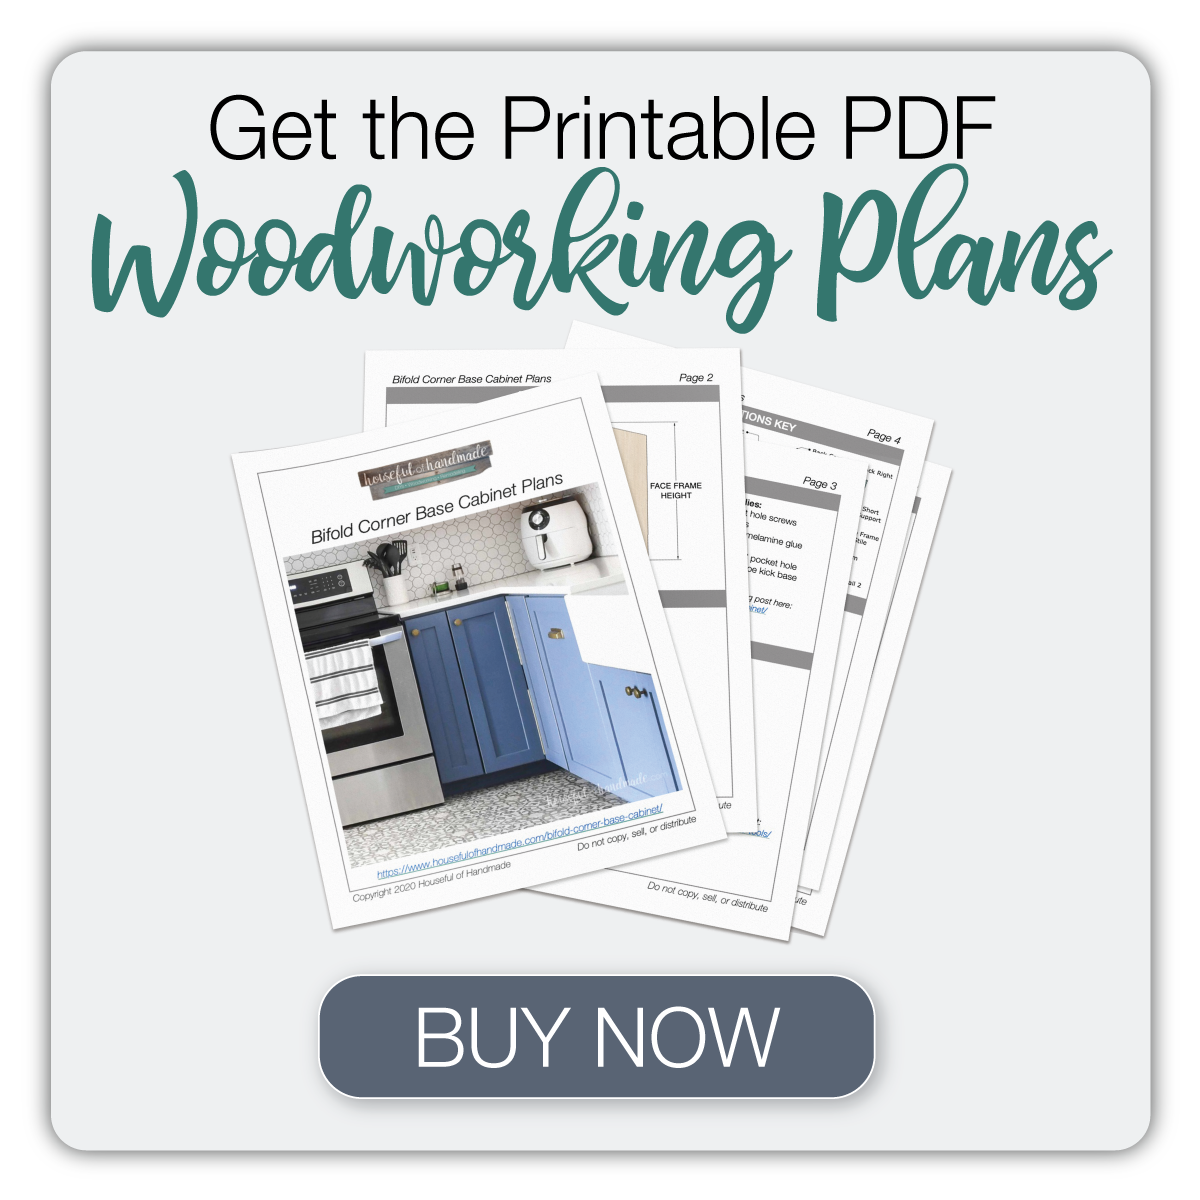 Button to buy the printable PDF woodworking plans for building custom bifold corner base cabinets..